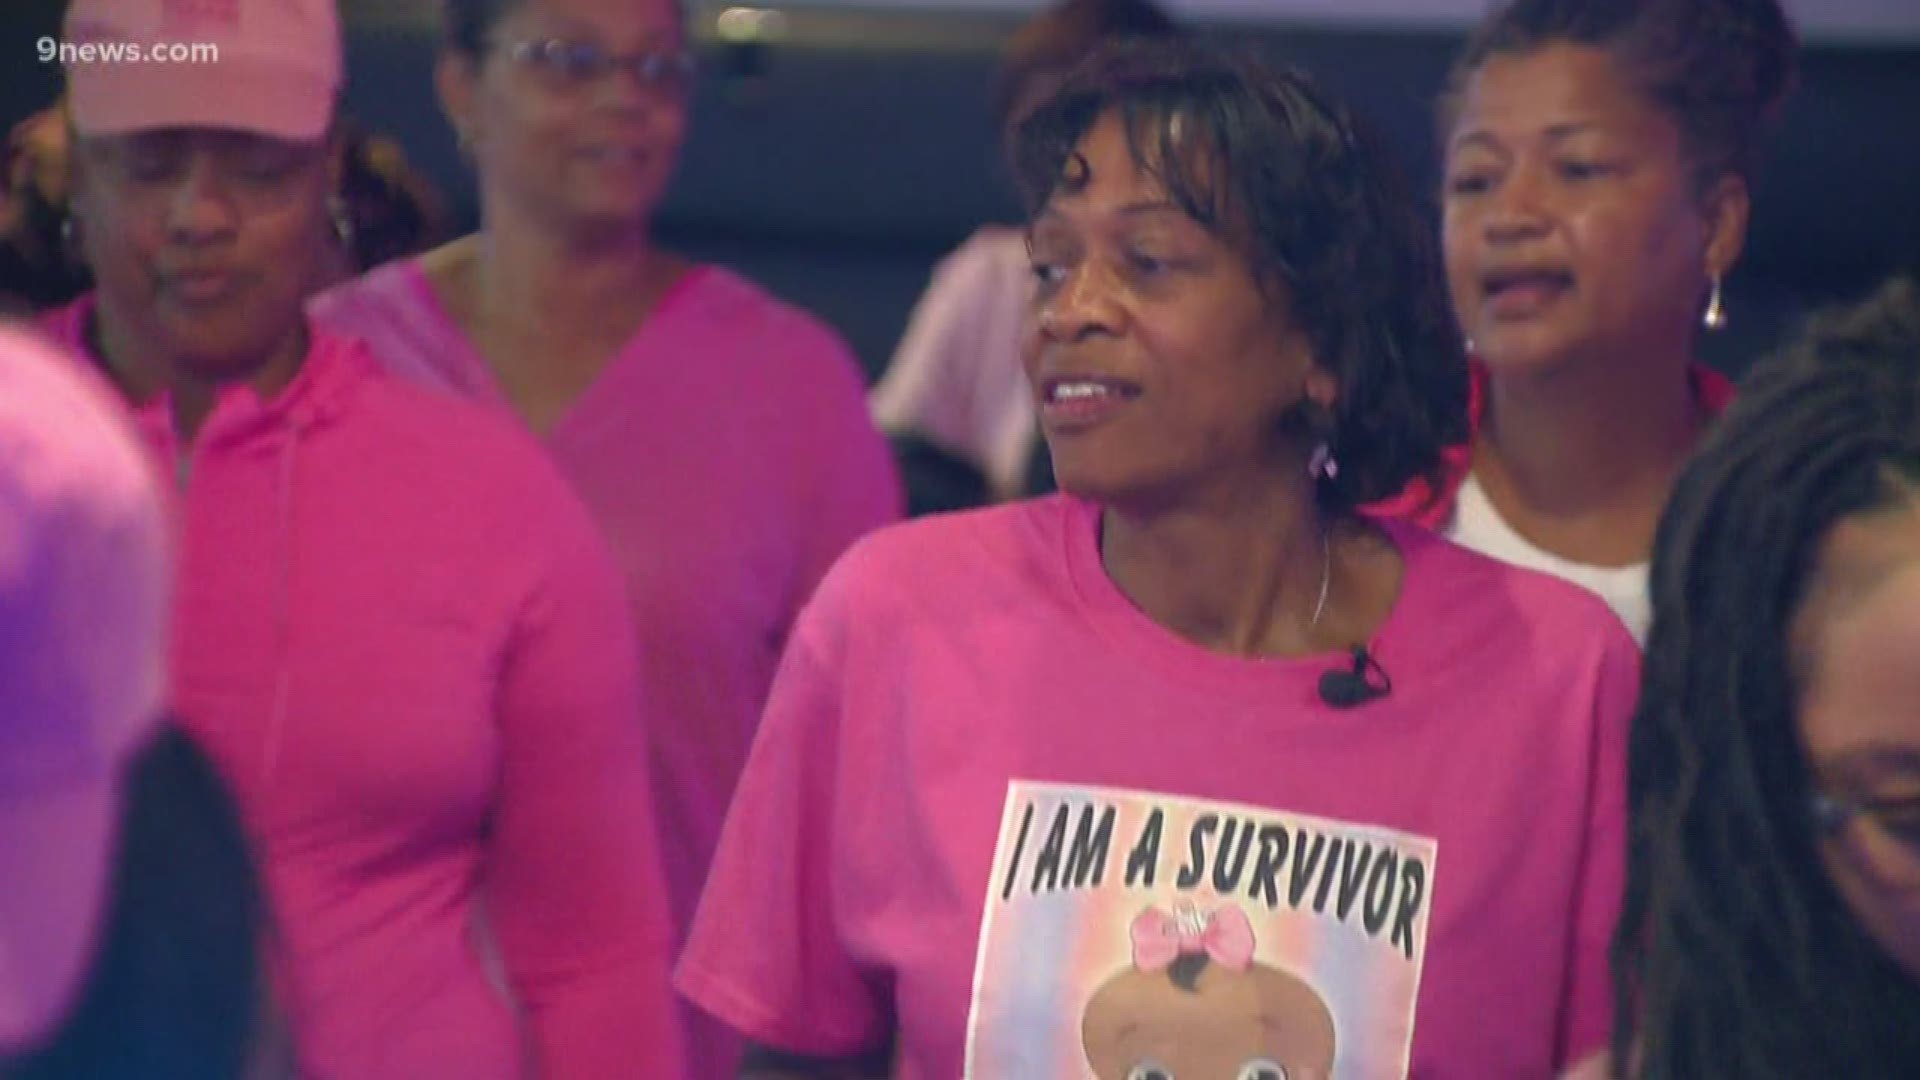 A group of breast cancer survivors in Aurora danced for their health.